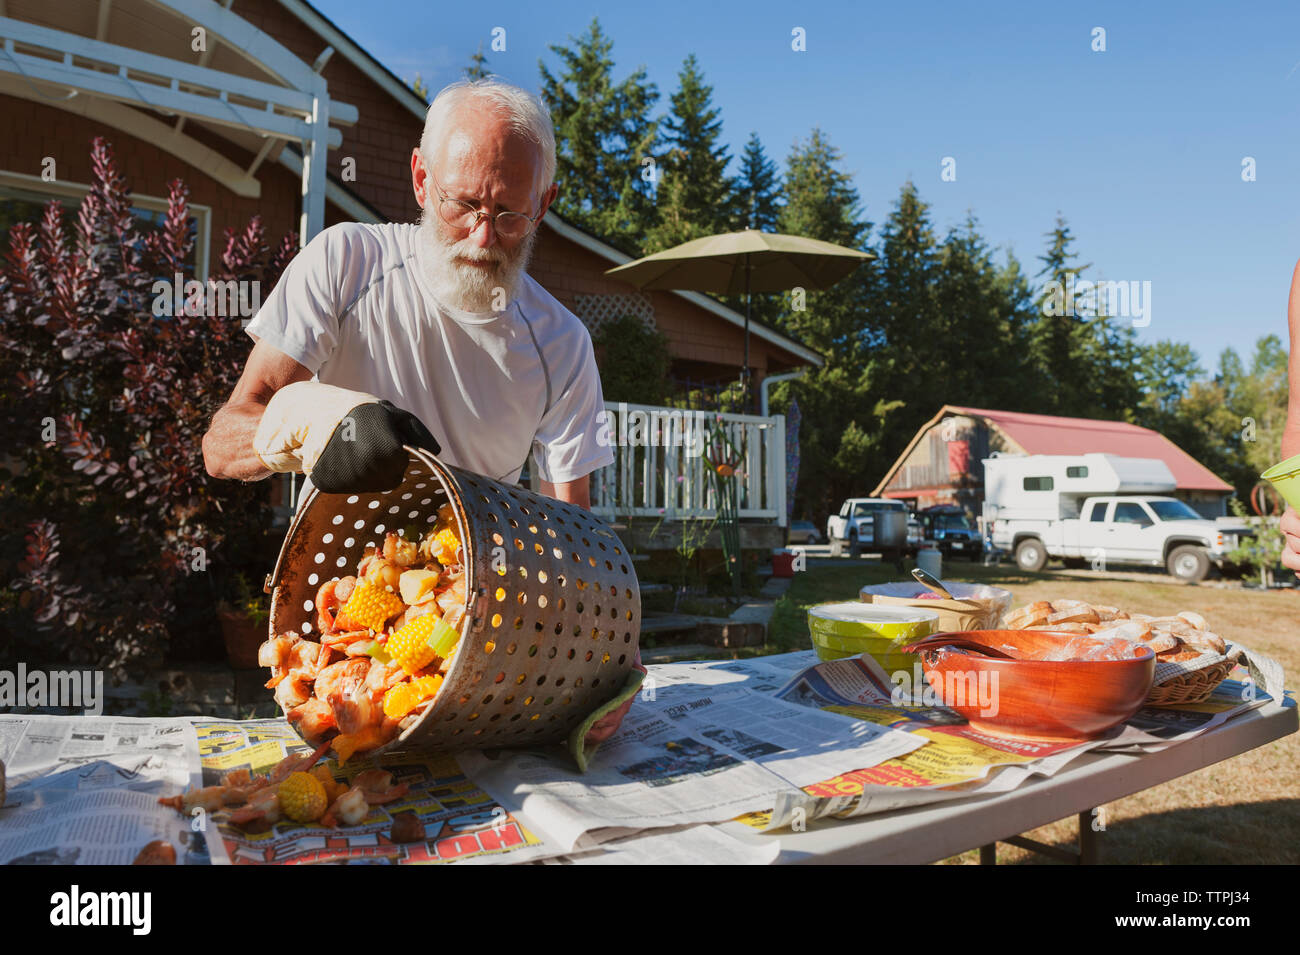 Man removing food from container on table in backyard against sky during sunny day Stock Photo